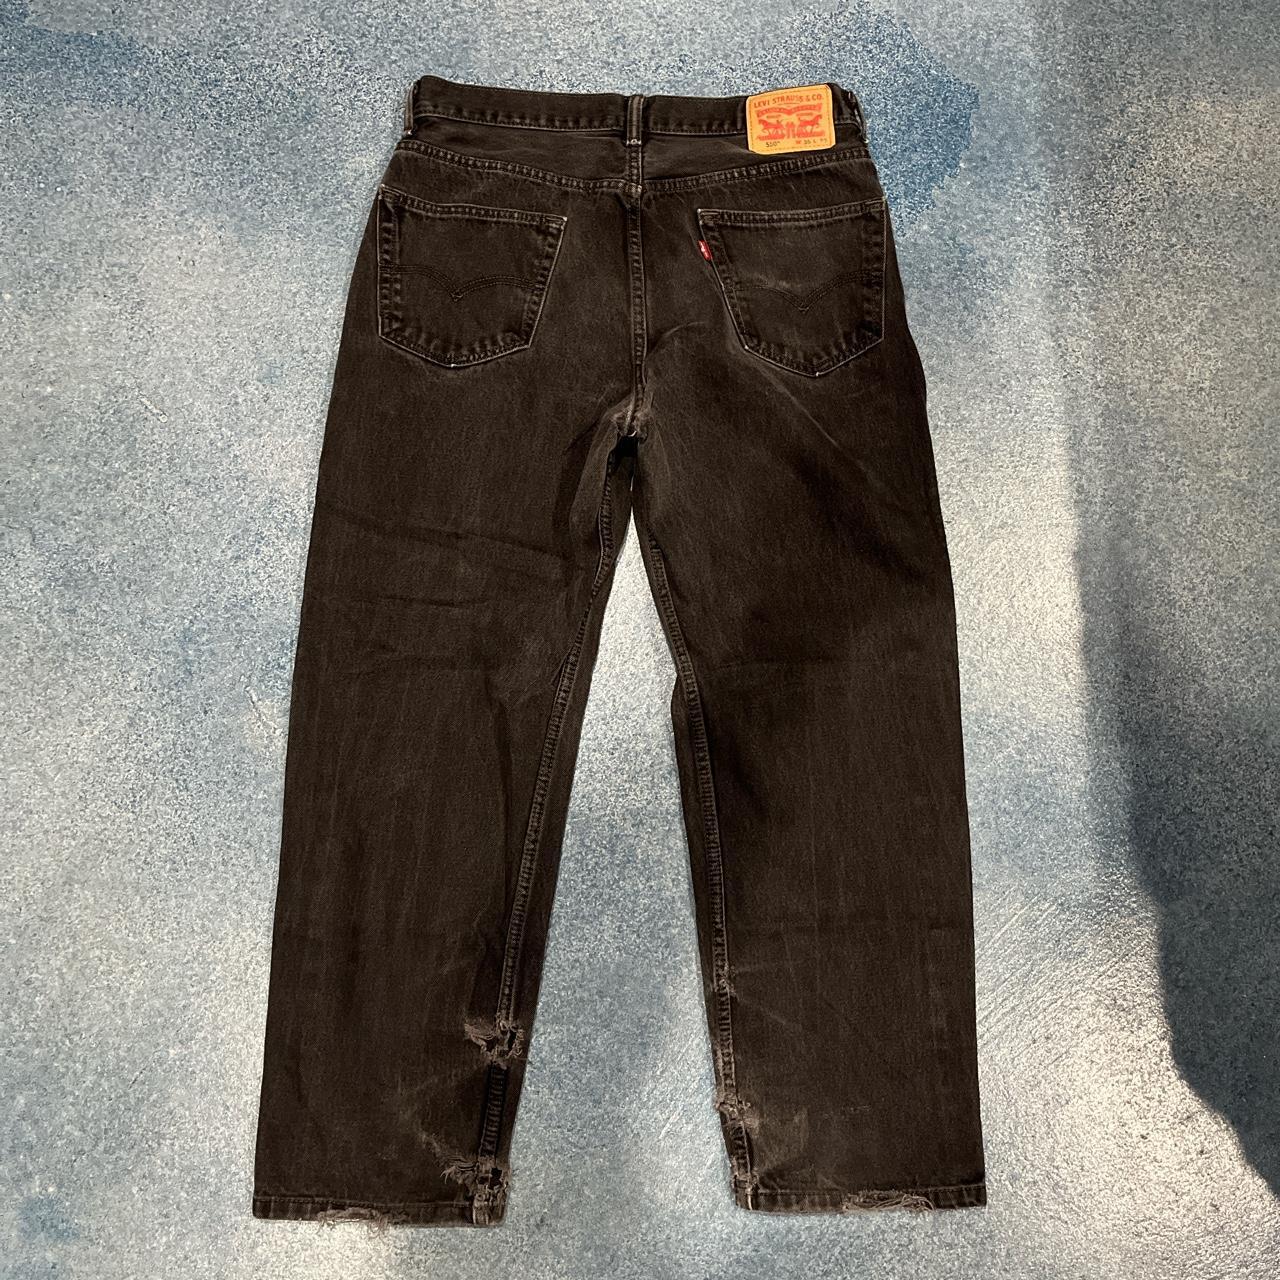 Levi's Men's Black and Brown Jeans (2)